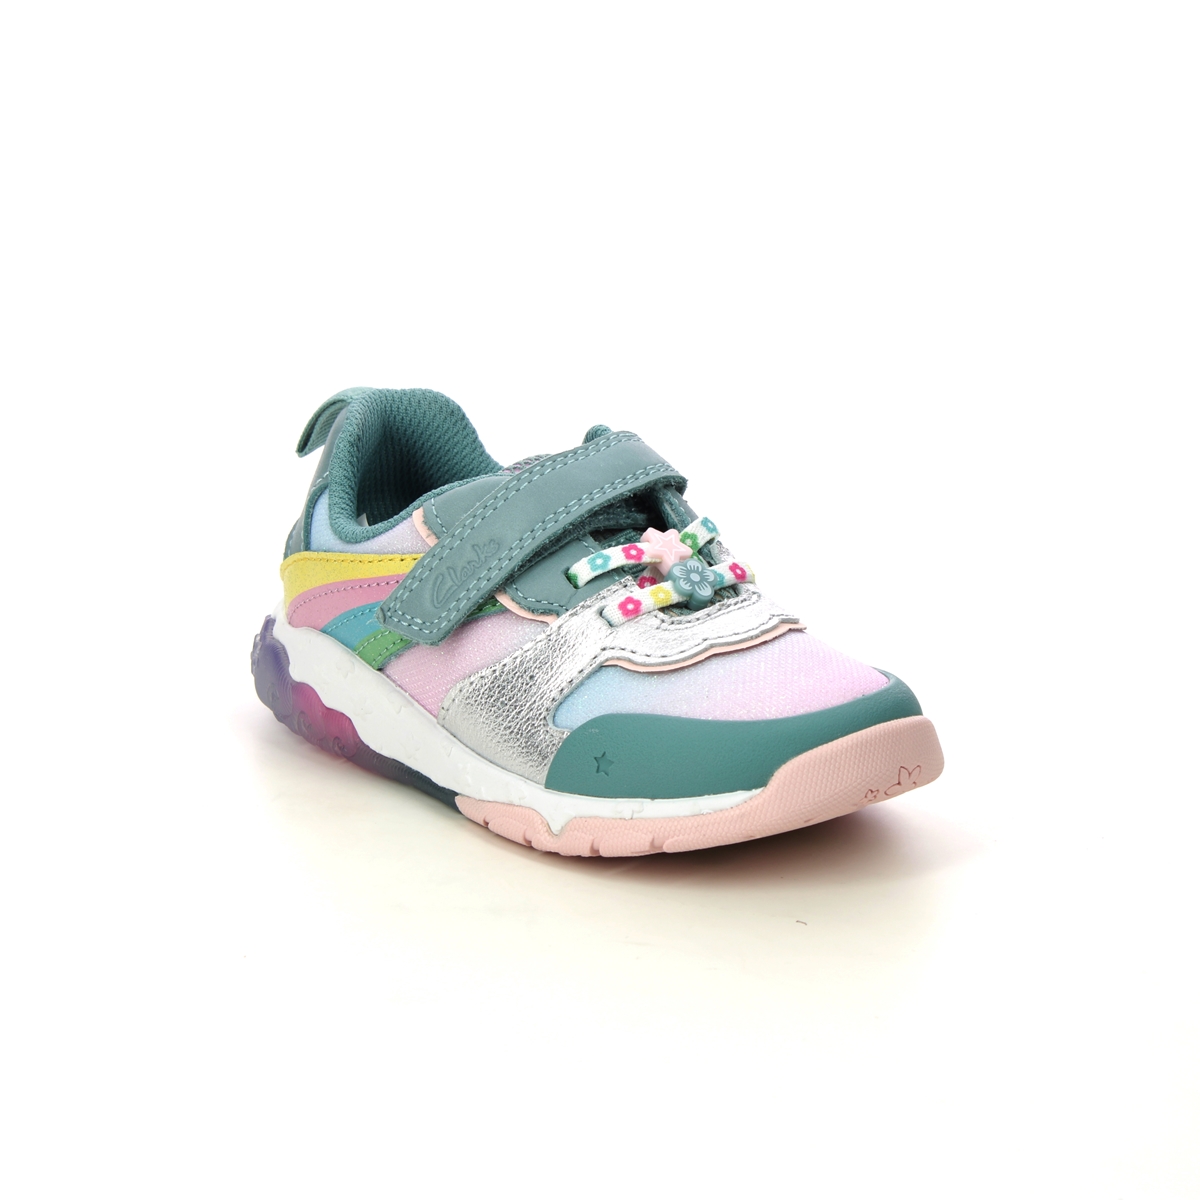 Clarks Tidal Star T Aqua Kids toddler girls trainers 7606-26F in a Plain Leather and Textile in Size 5